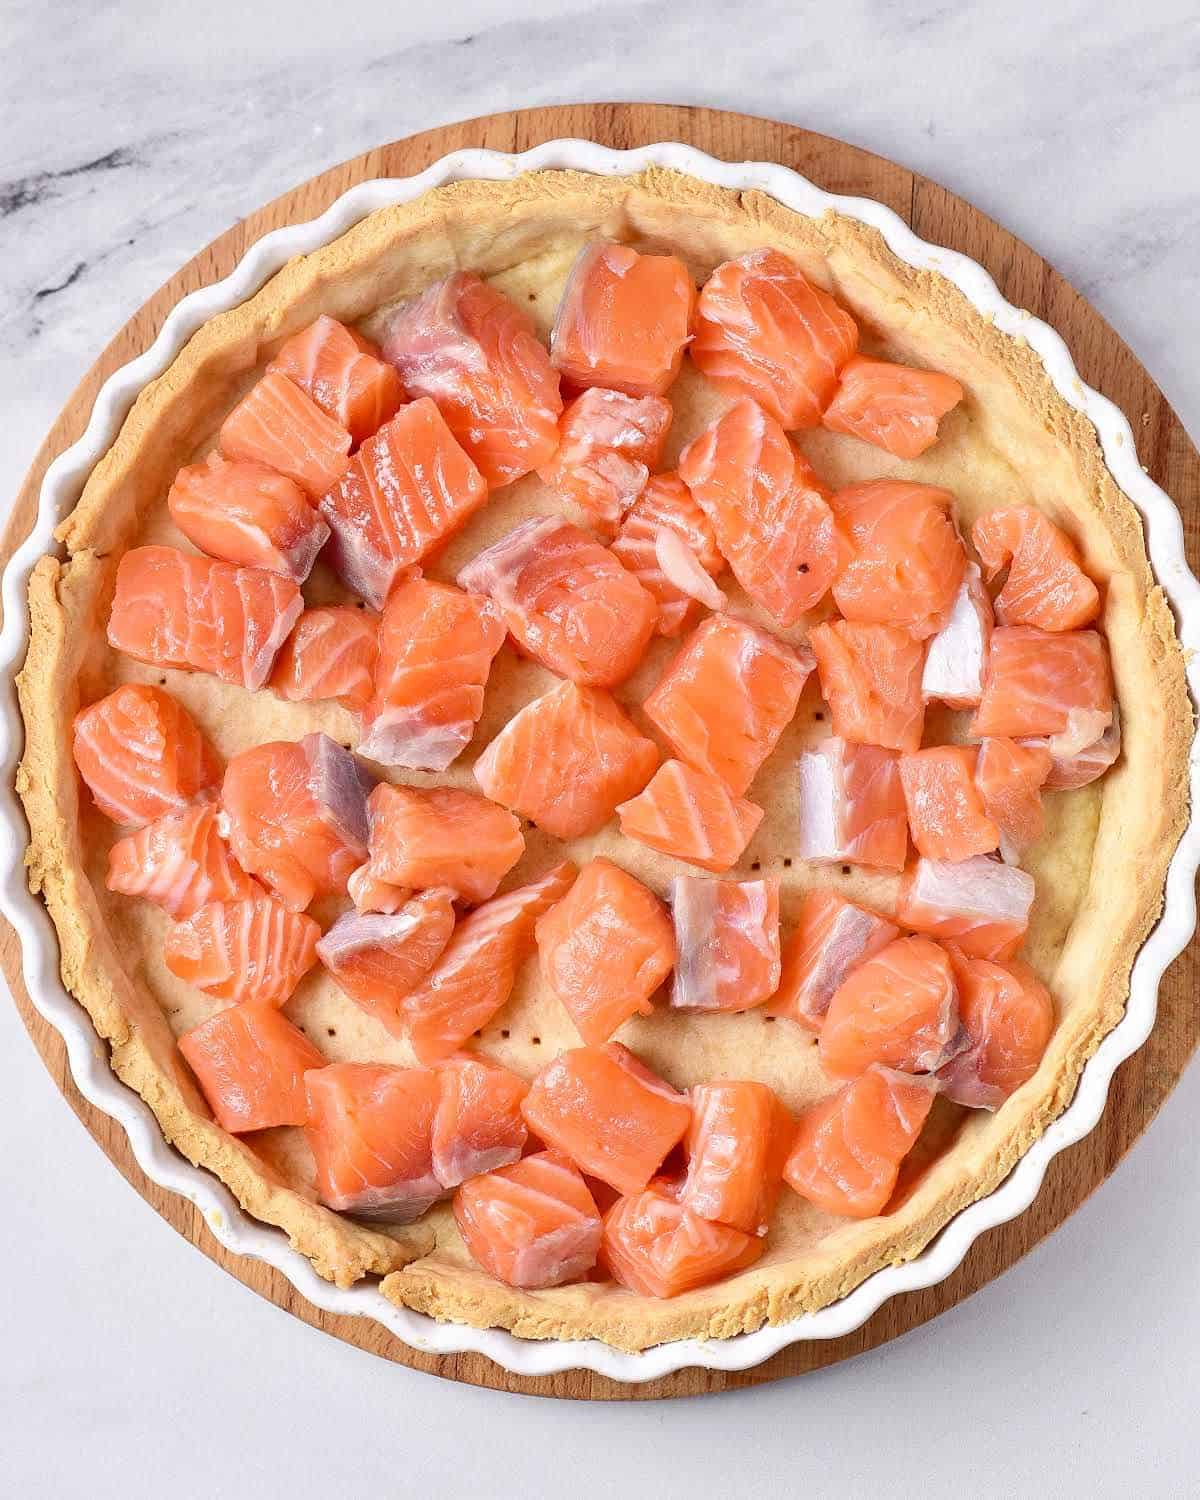 Raw salmon pieces in an unbaked crust on a white marbled surface.